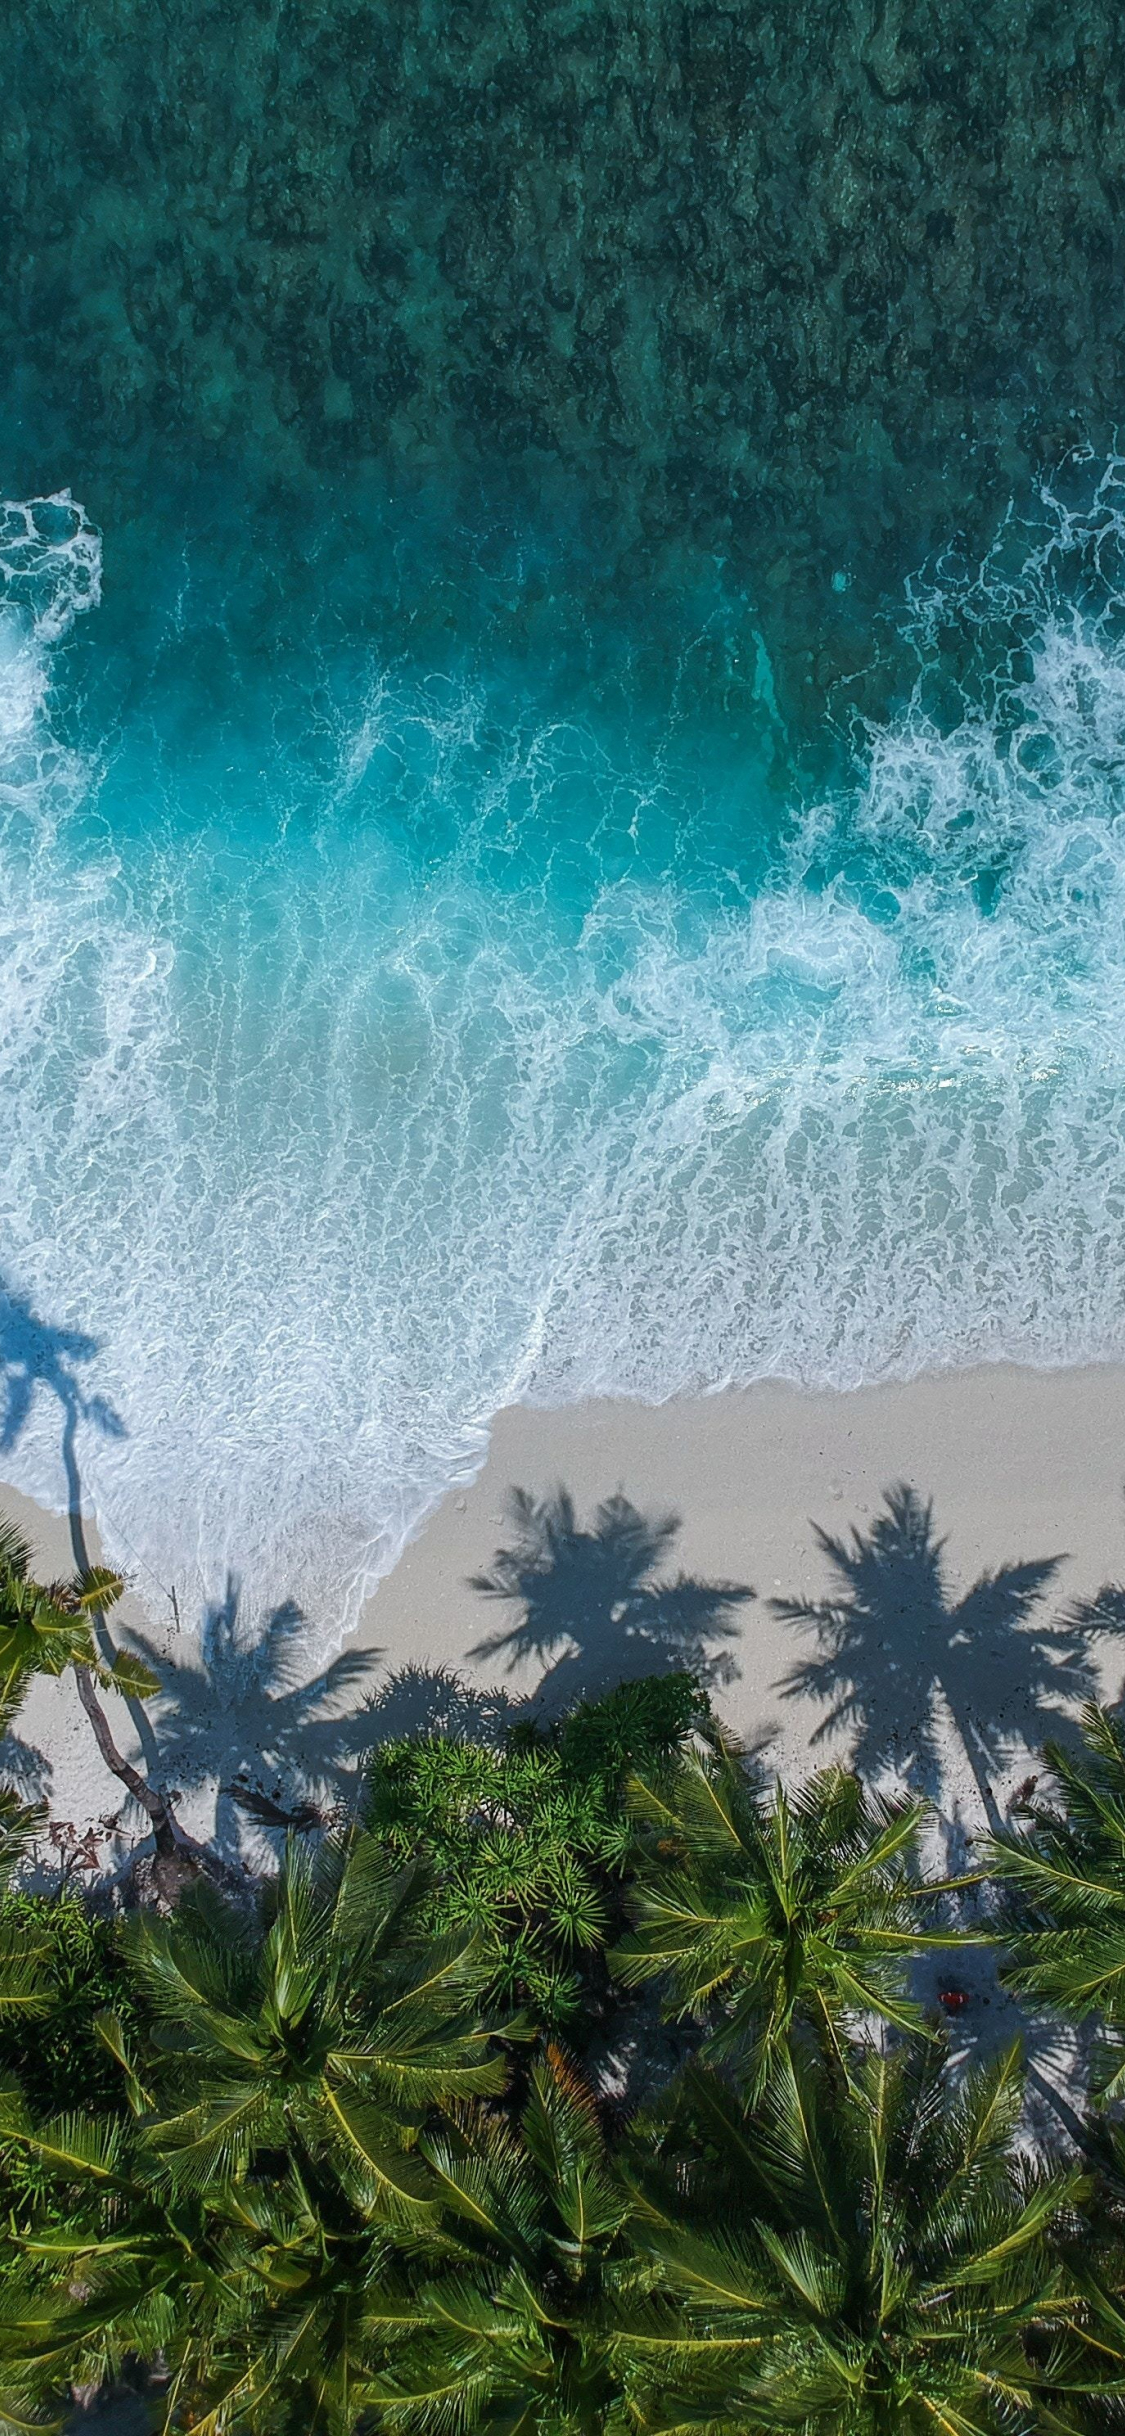 1125x2436 Download beautiful beach, aerial view, palm trees, sea wallpaper, iphone x, hd image, background, 17336